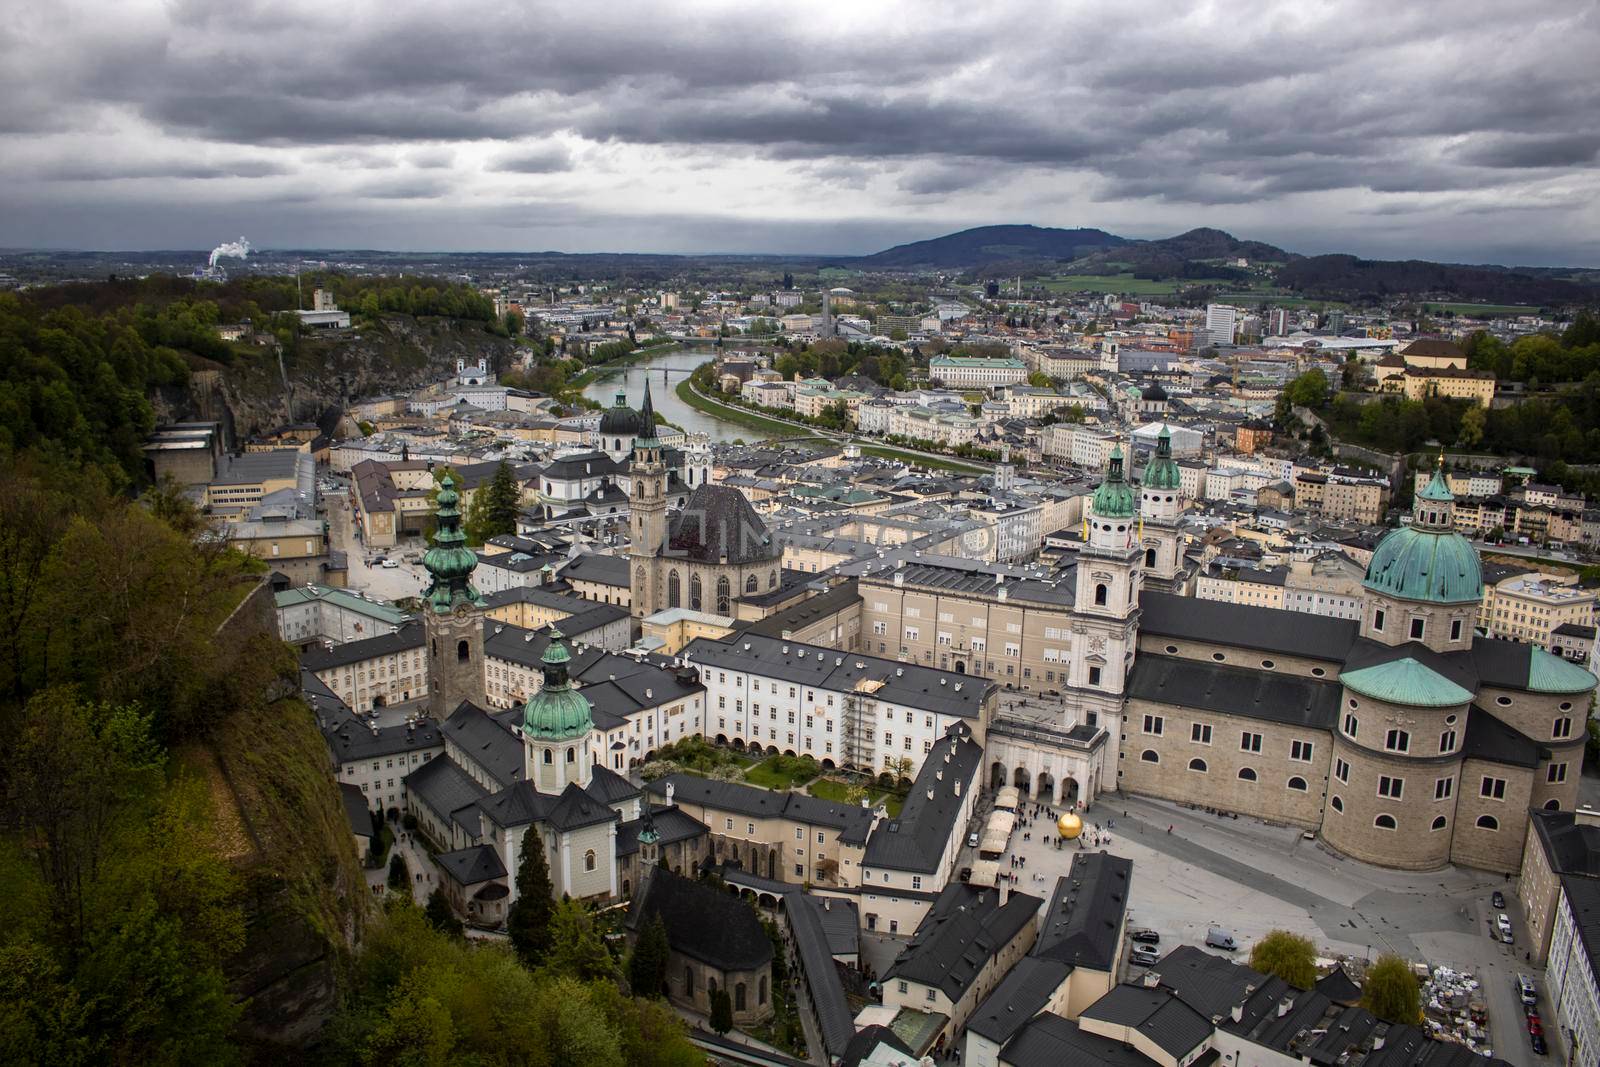 View from above of Salzburg city under a cloudy sky in Austria